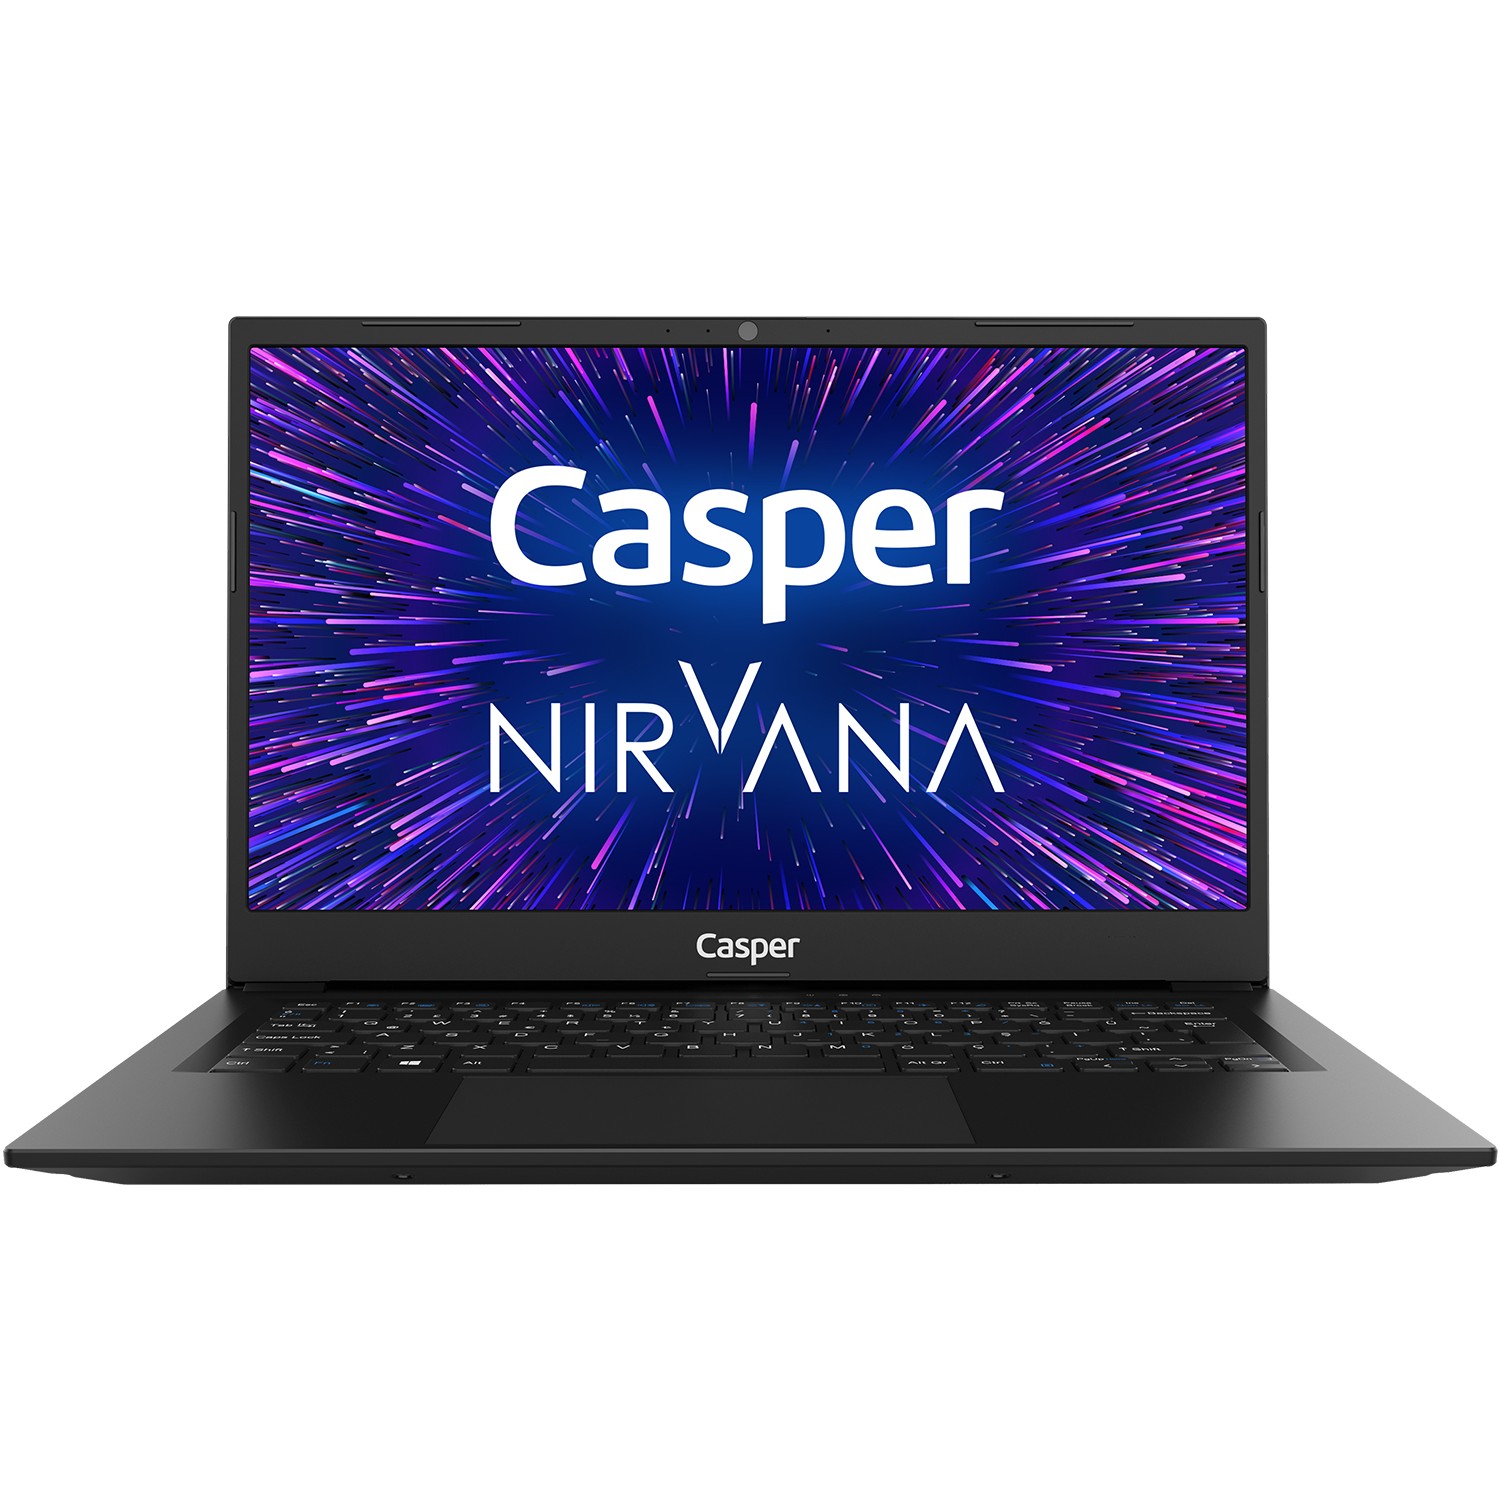 Casper%20Nirvana%20X400.1021-8U00X-S-F%20Intel%20Core%20i5%2010210U%208GB%20250GB%20NVME%20SSD%20Freedos%2014’’%20FHD%20Notebook